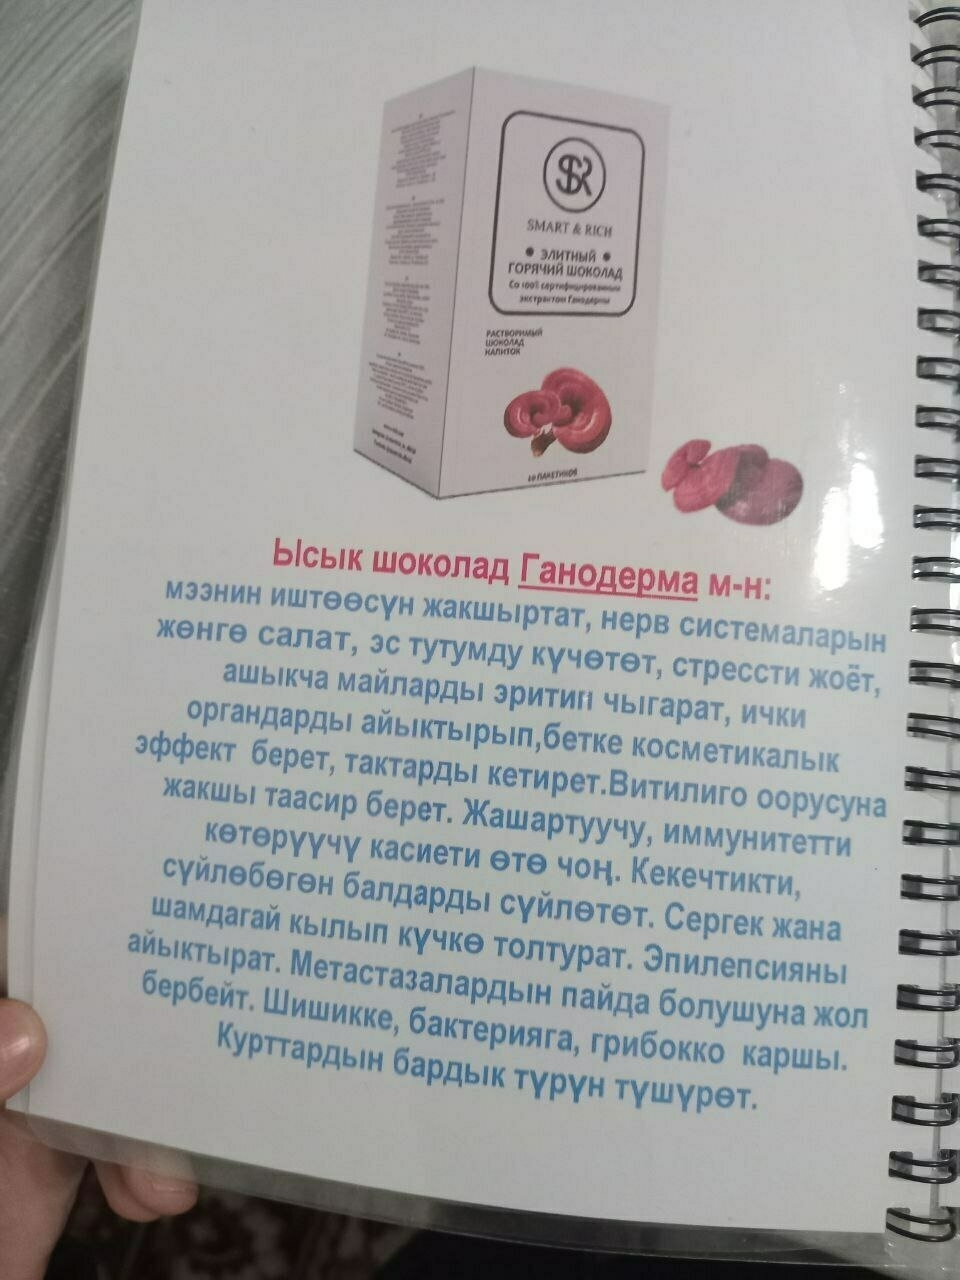 laminated booklet page with a hot chocolate box picture, title below in red ("hot chocolate with ganoderma (a mushroom)") and a product description  in blue text